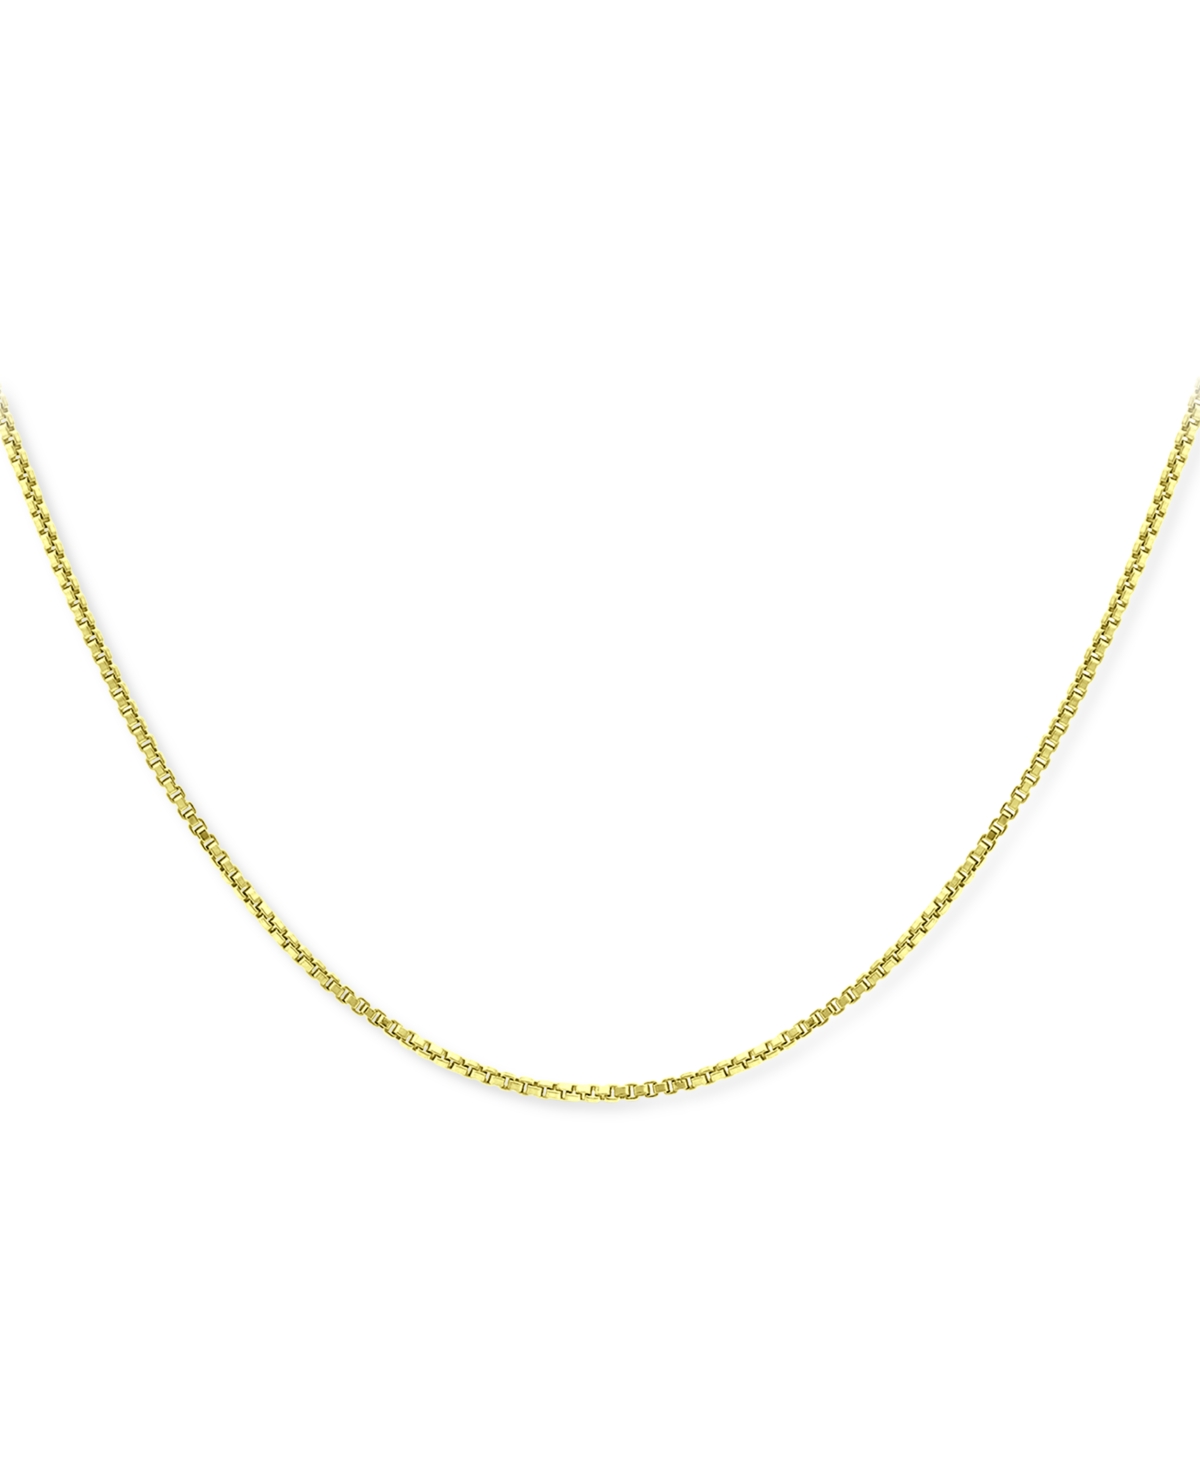 Box Link 16" Chain Necklace in 18k Gold-Plated Sterling Silver, Created for Macy's - Gold Over Silver